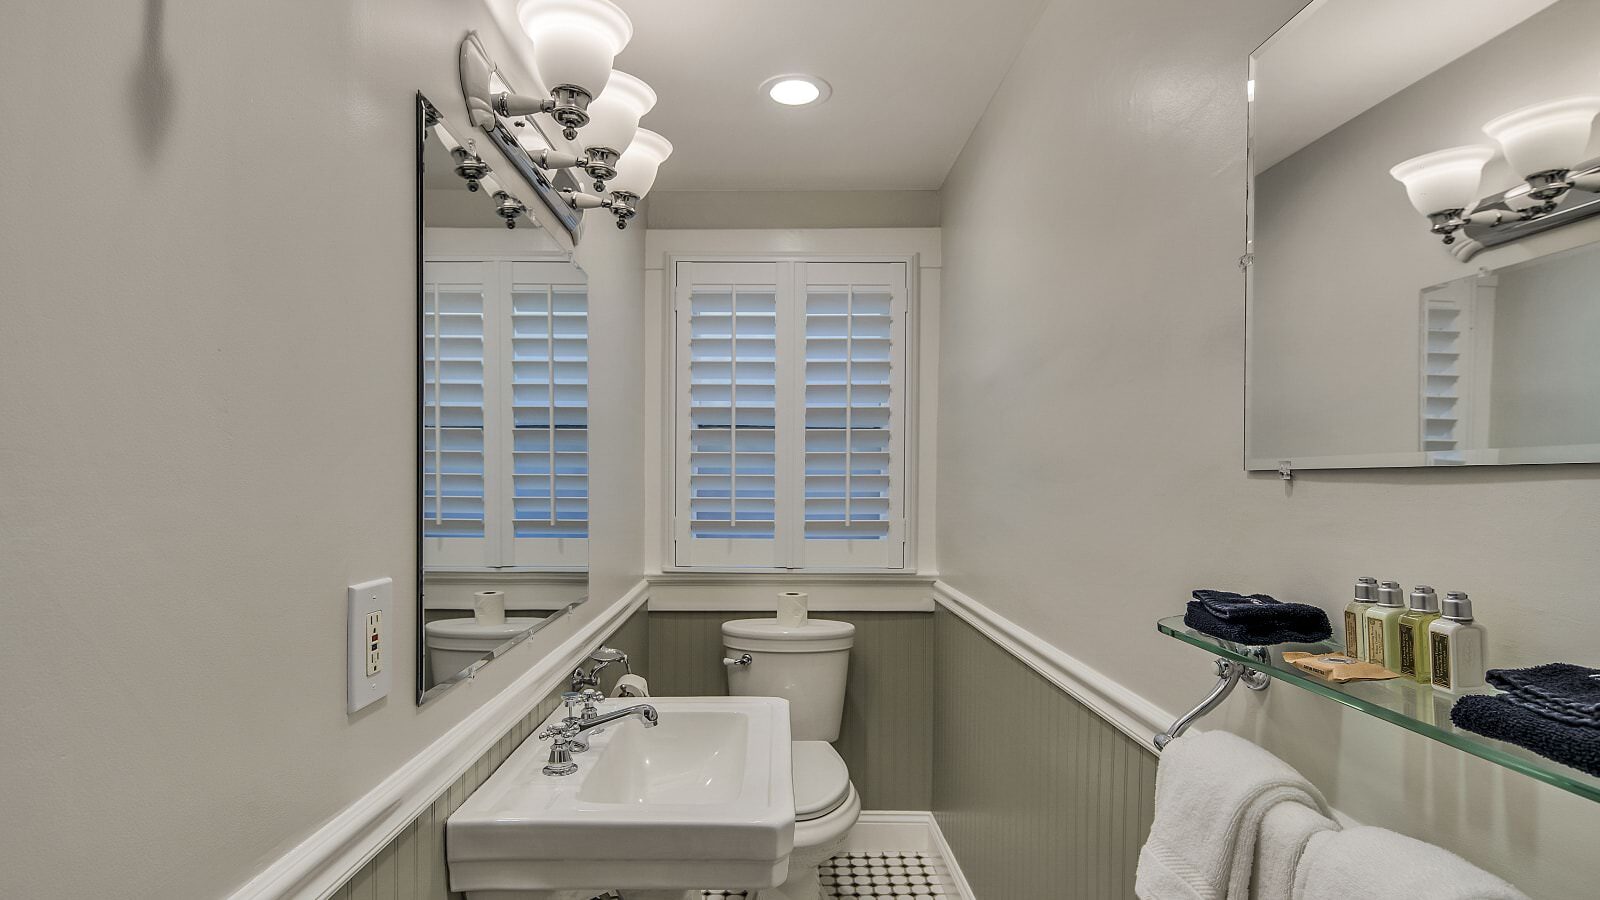 Bathroom with white walls, light gray wainscotting, white sink, and white toilet